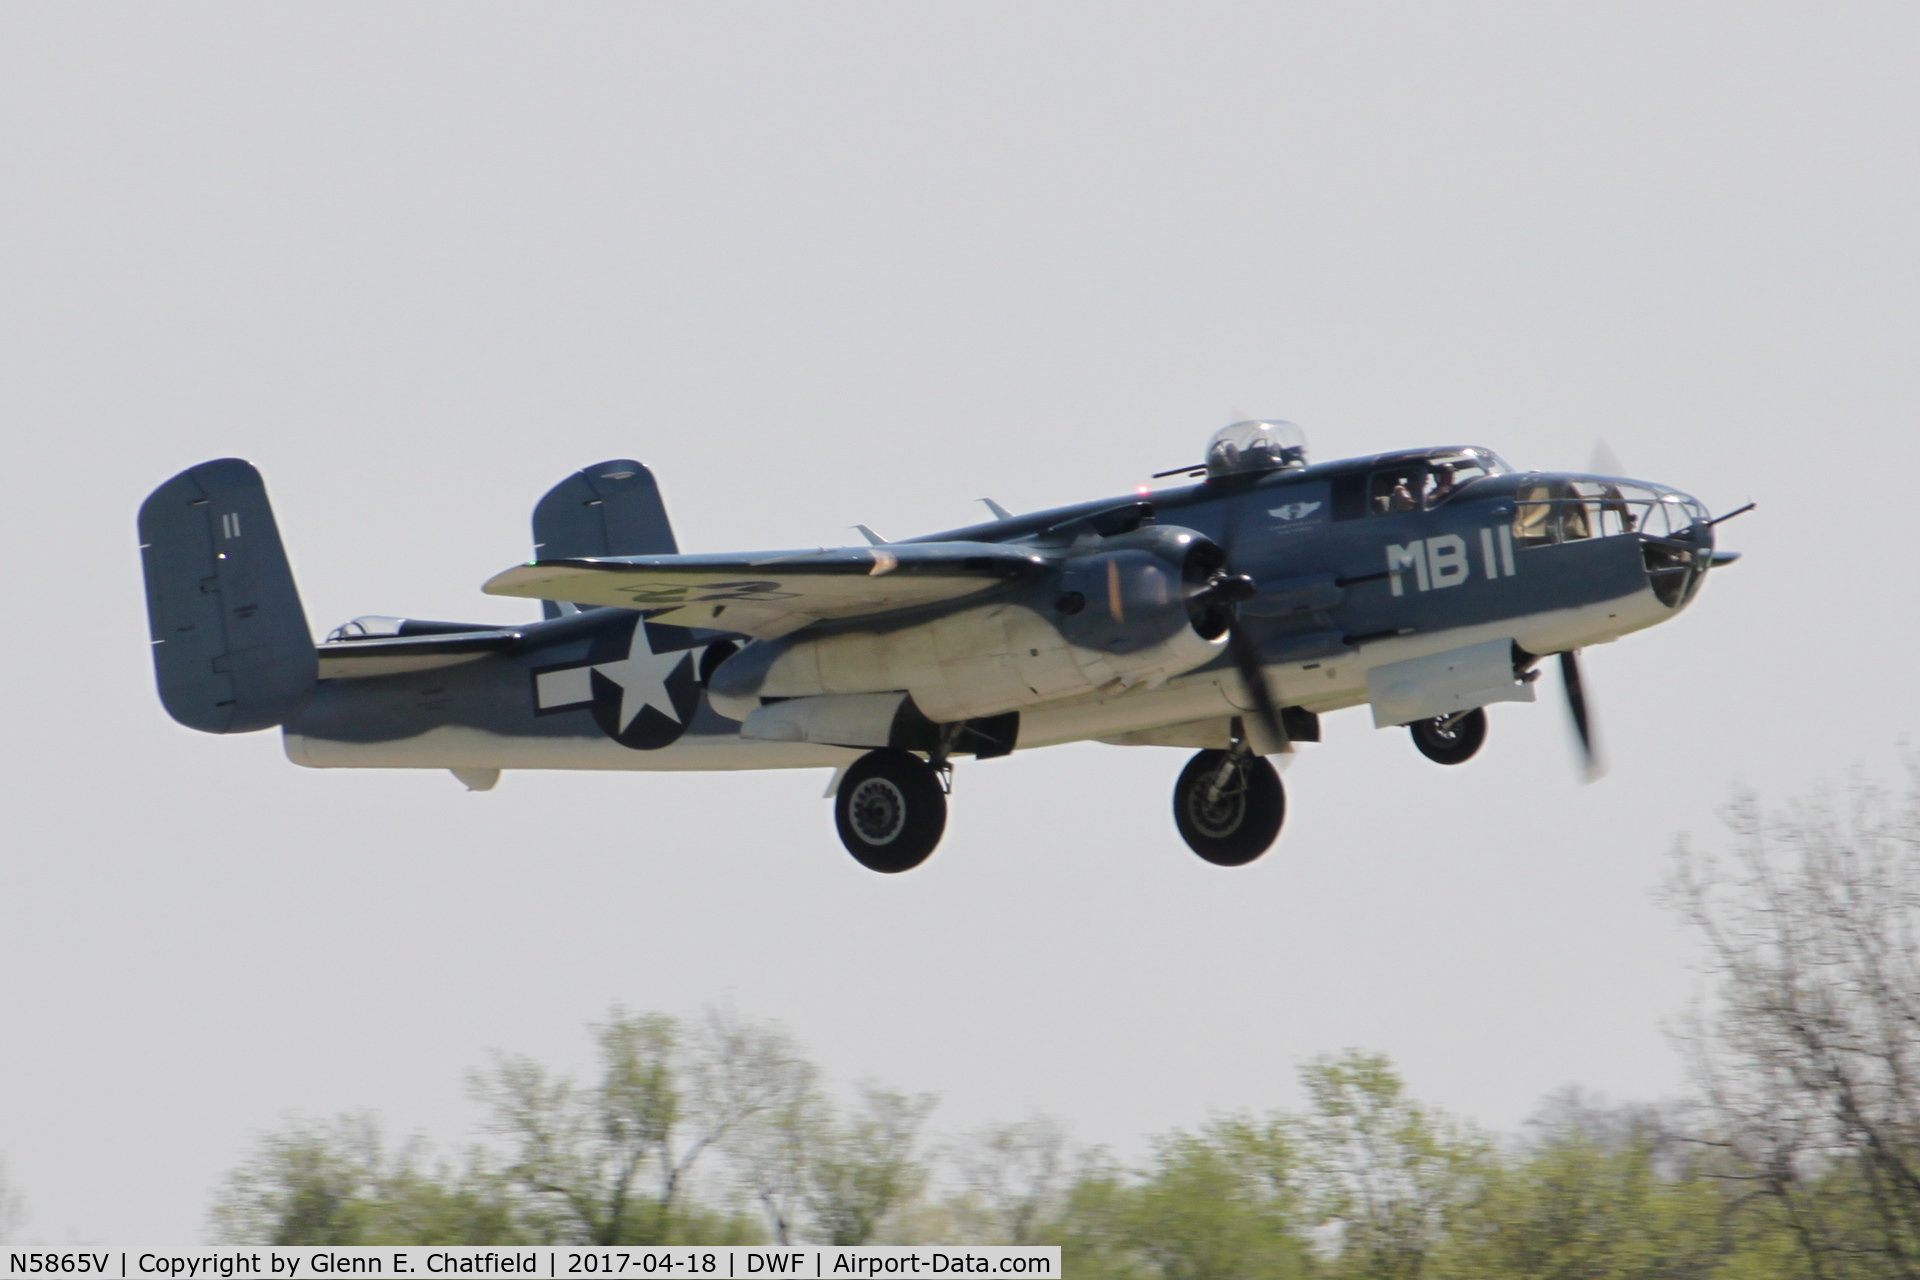 N5865V, 1945 North American B-25J Mitchell Mitchell C/N 108-34263, Departing after the 75th Anniversary of the Doolittle Raid.